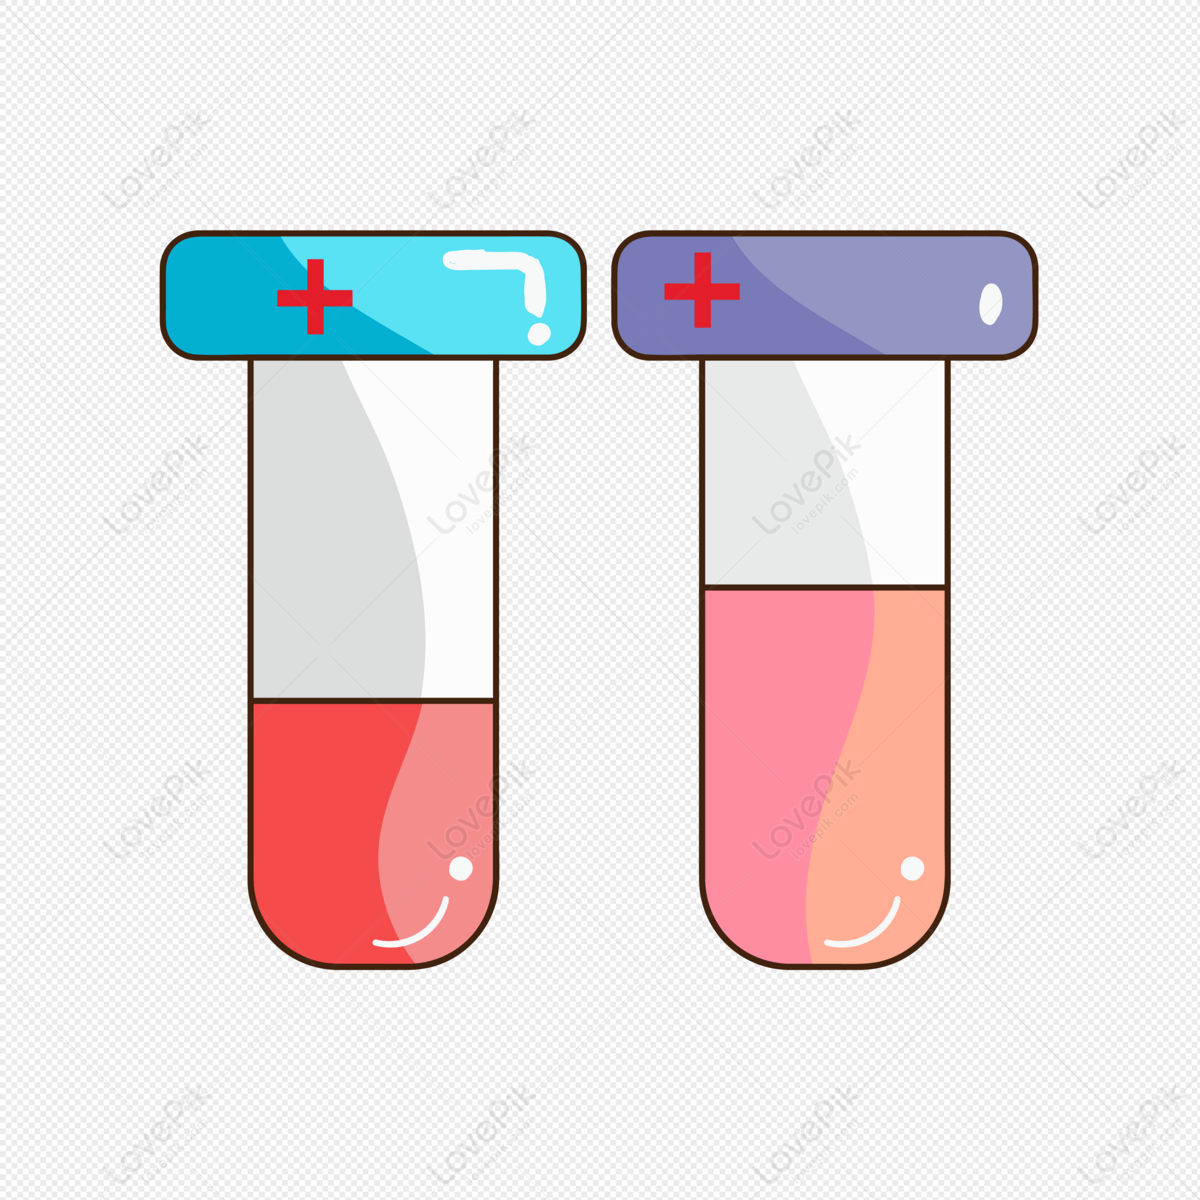 Test Tube PNG Free Download And Clipart Image For Free Download - Lovepik |  401340853